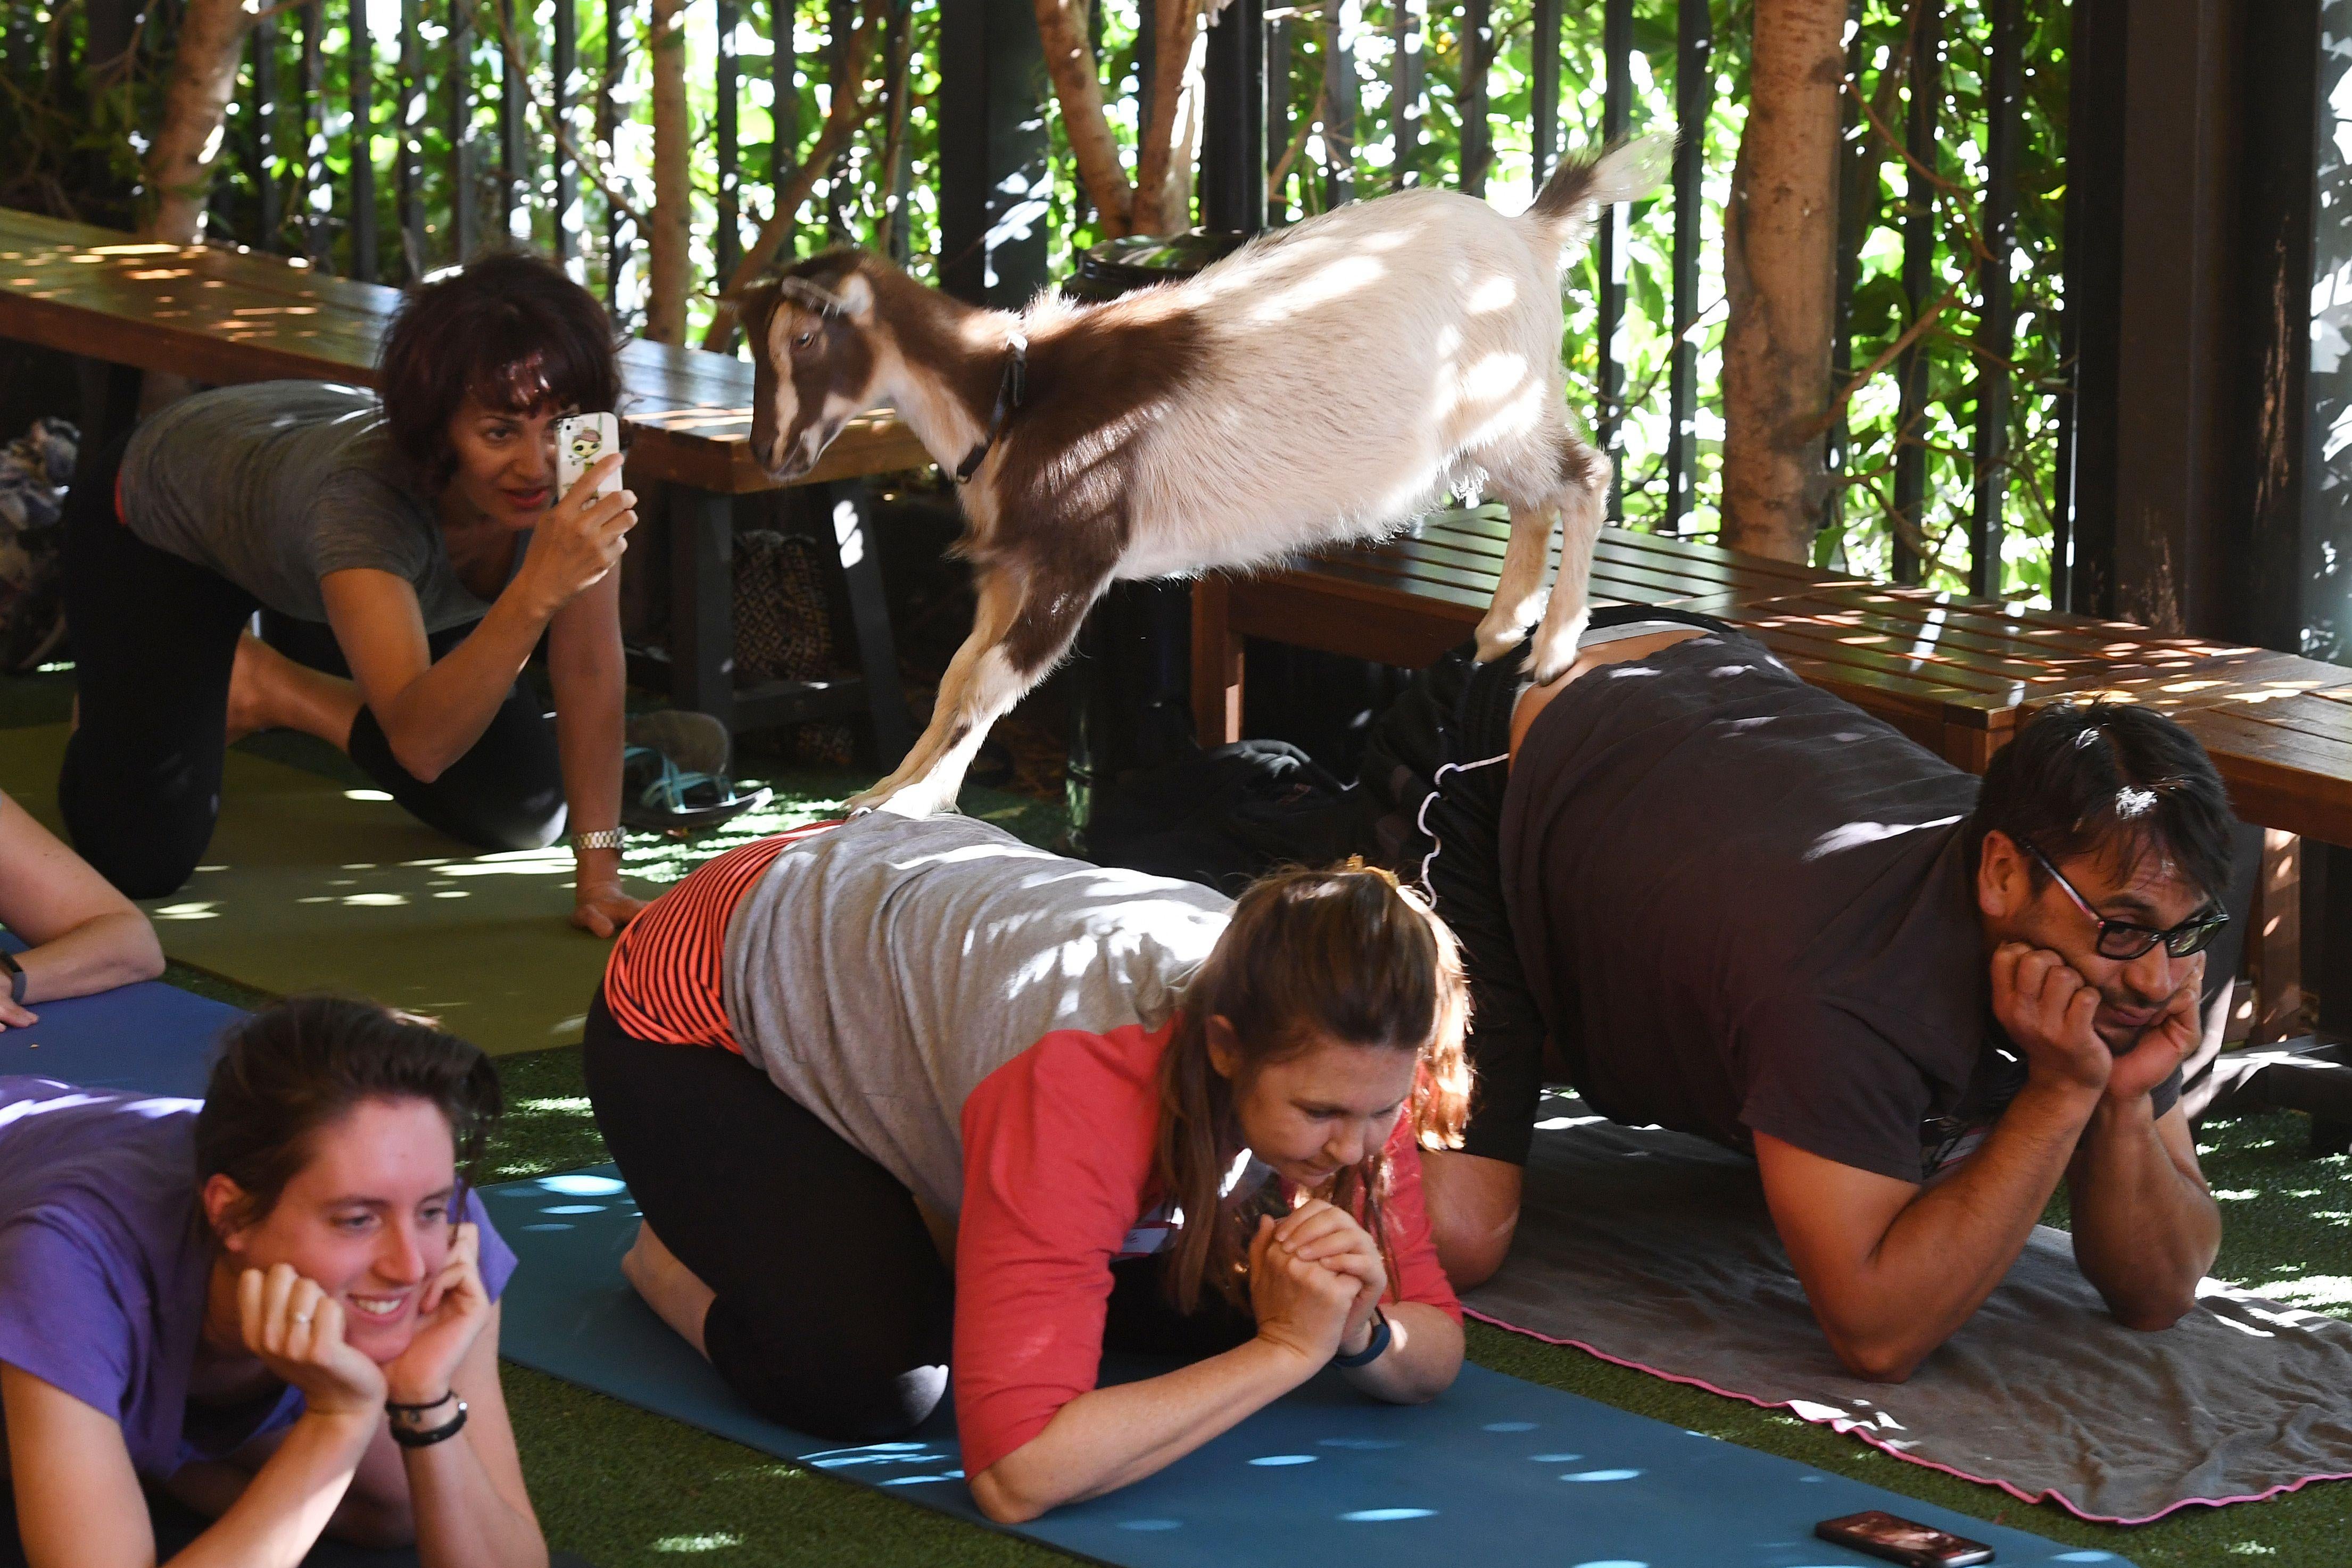 Several yoga attendees are lying on mats in a variation of child's pose. A small goat is standing on two of the participants' backs while another participant takes a photo from behind.